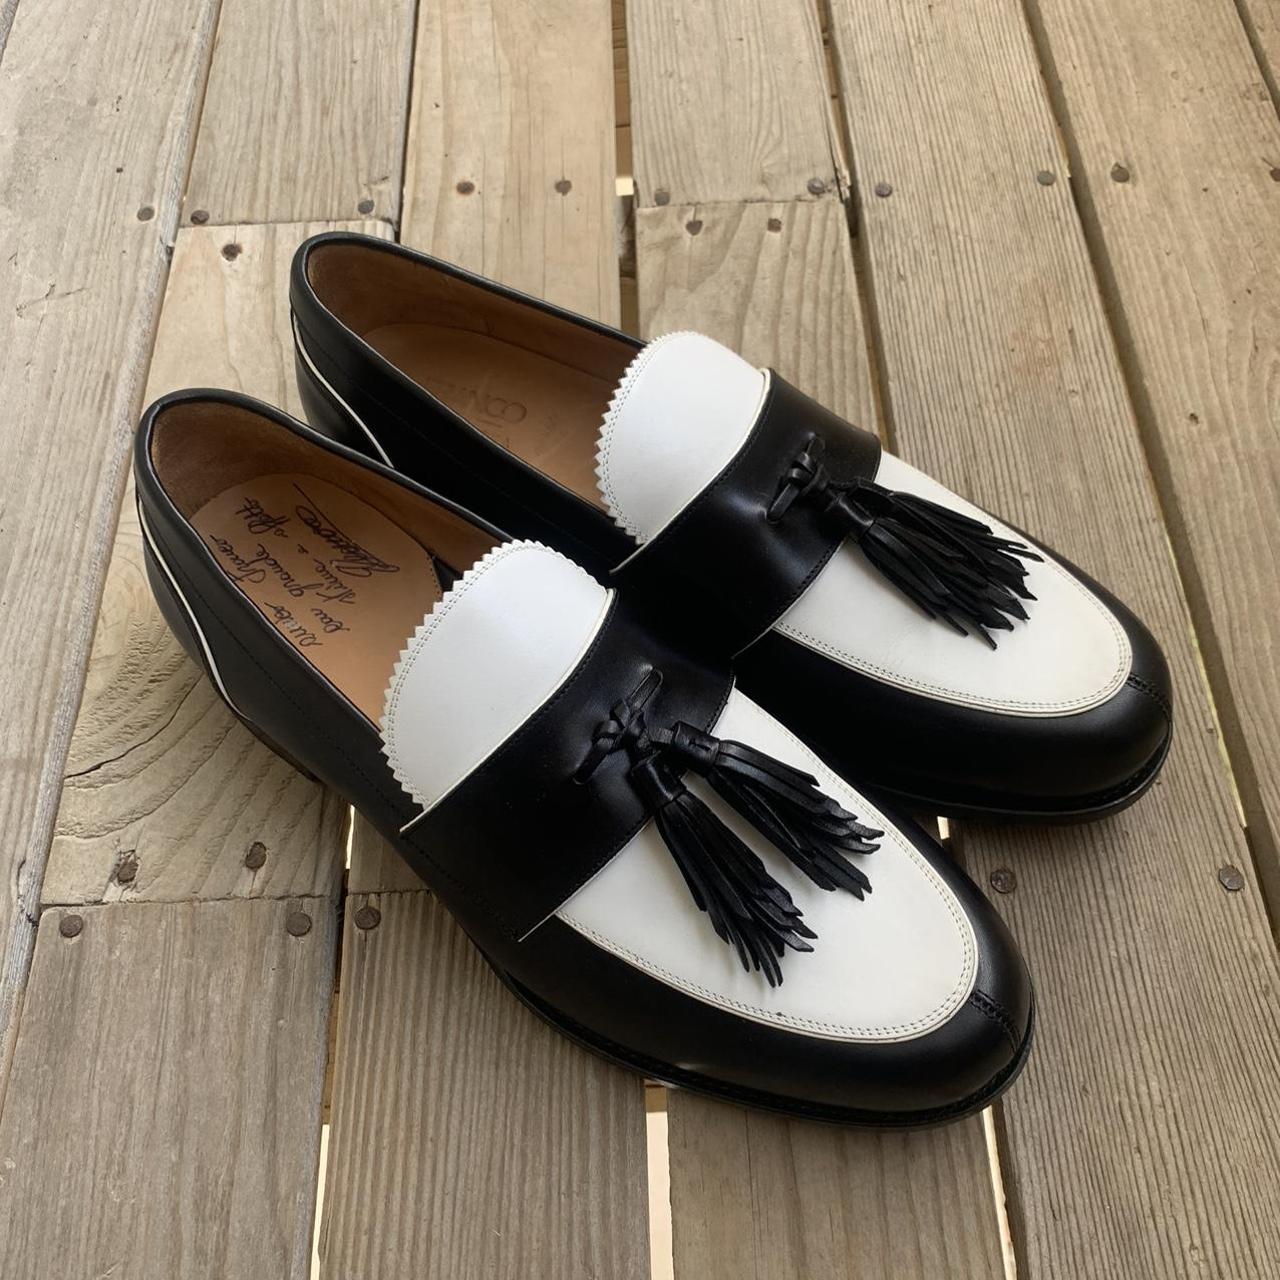 Dunhill Men's Black and White Loafers